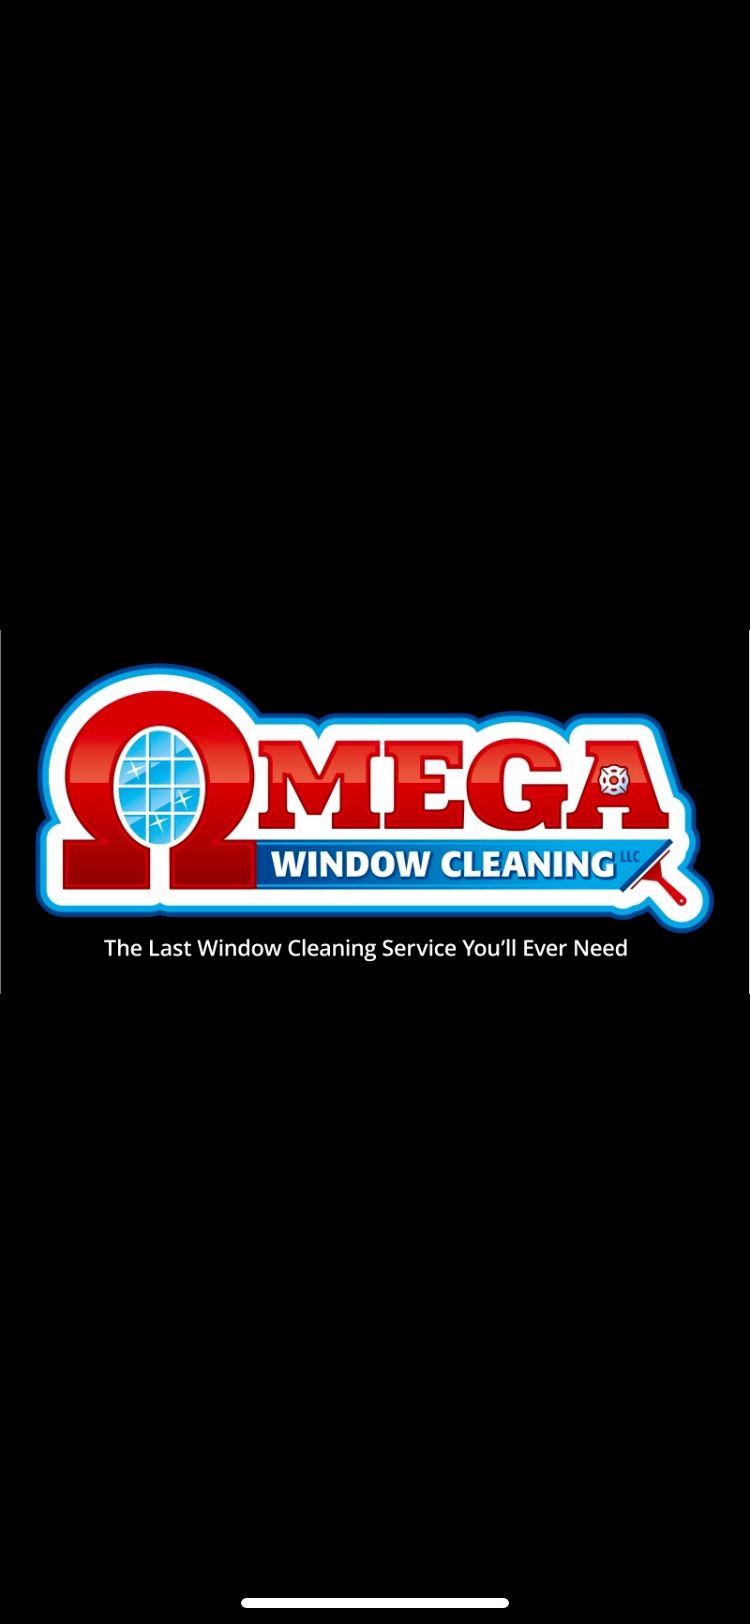 OMEGA WINDOW CLEANING